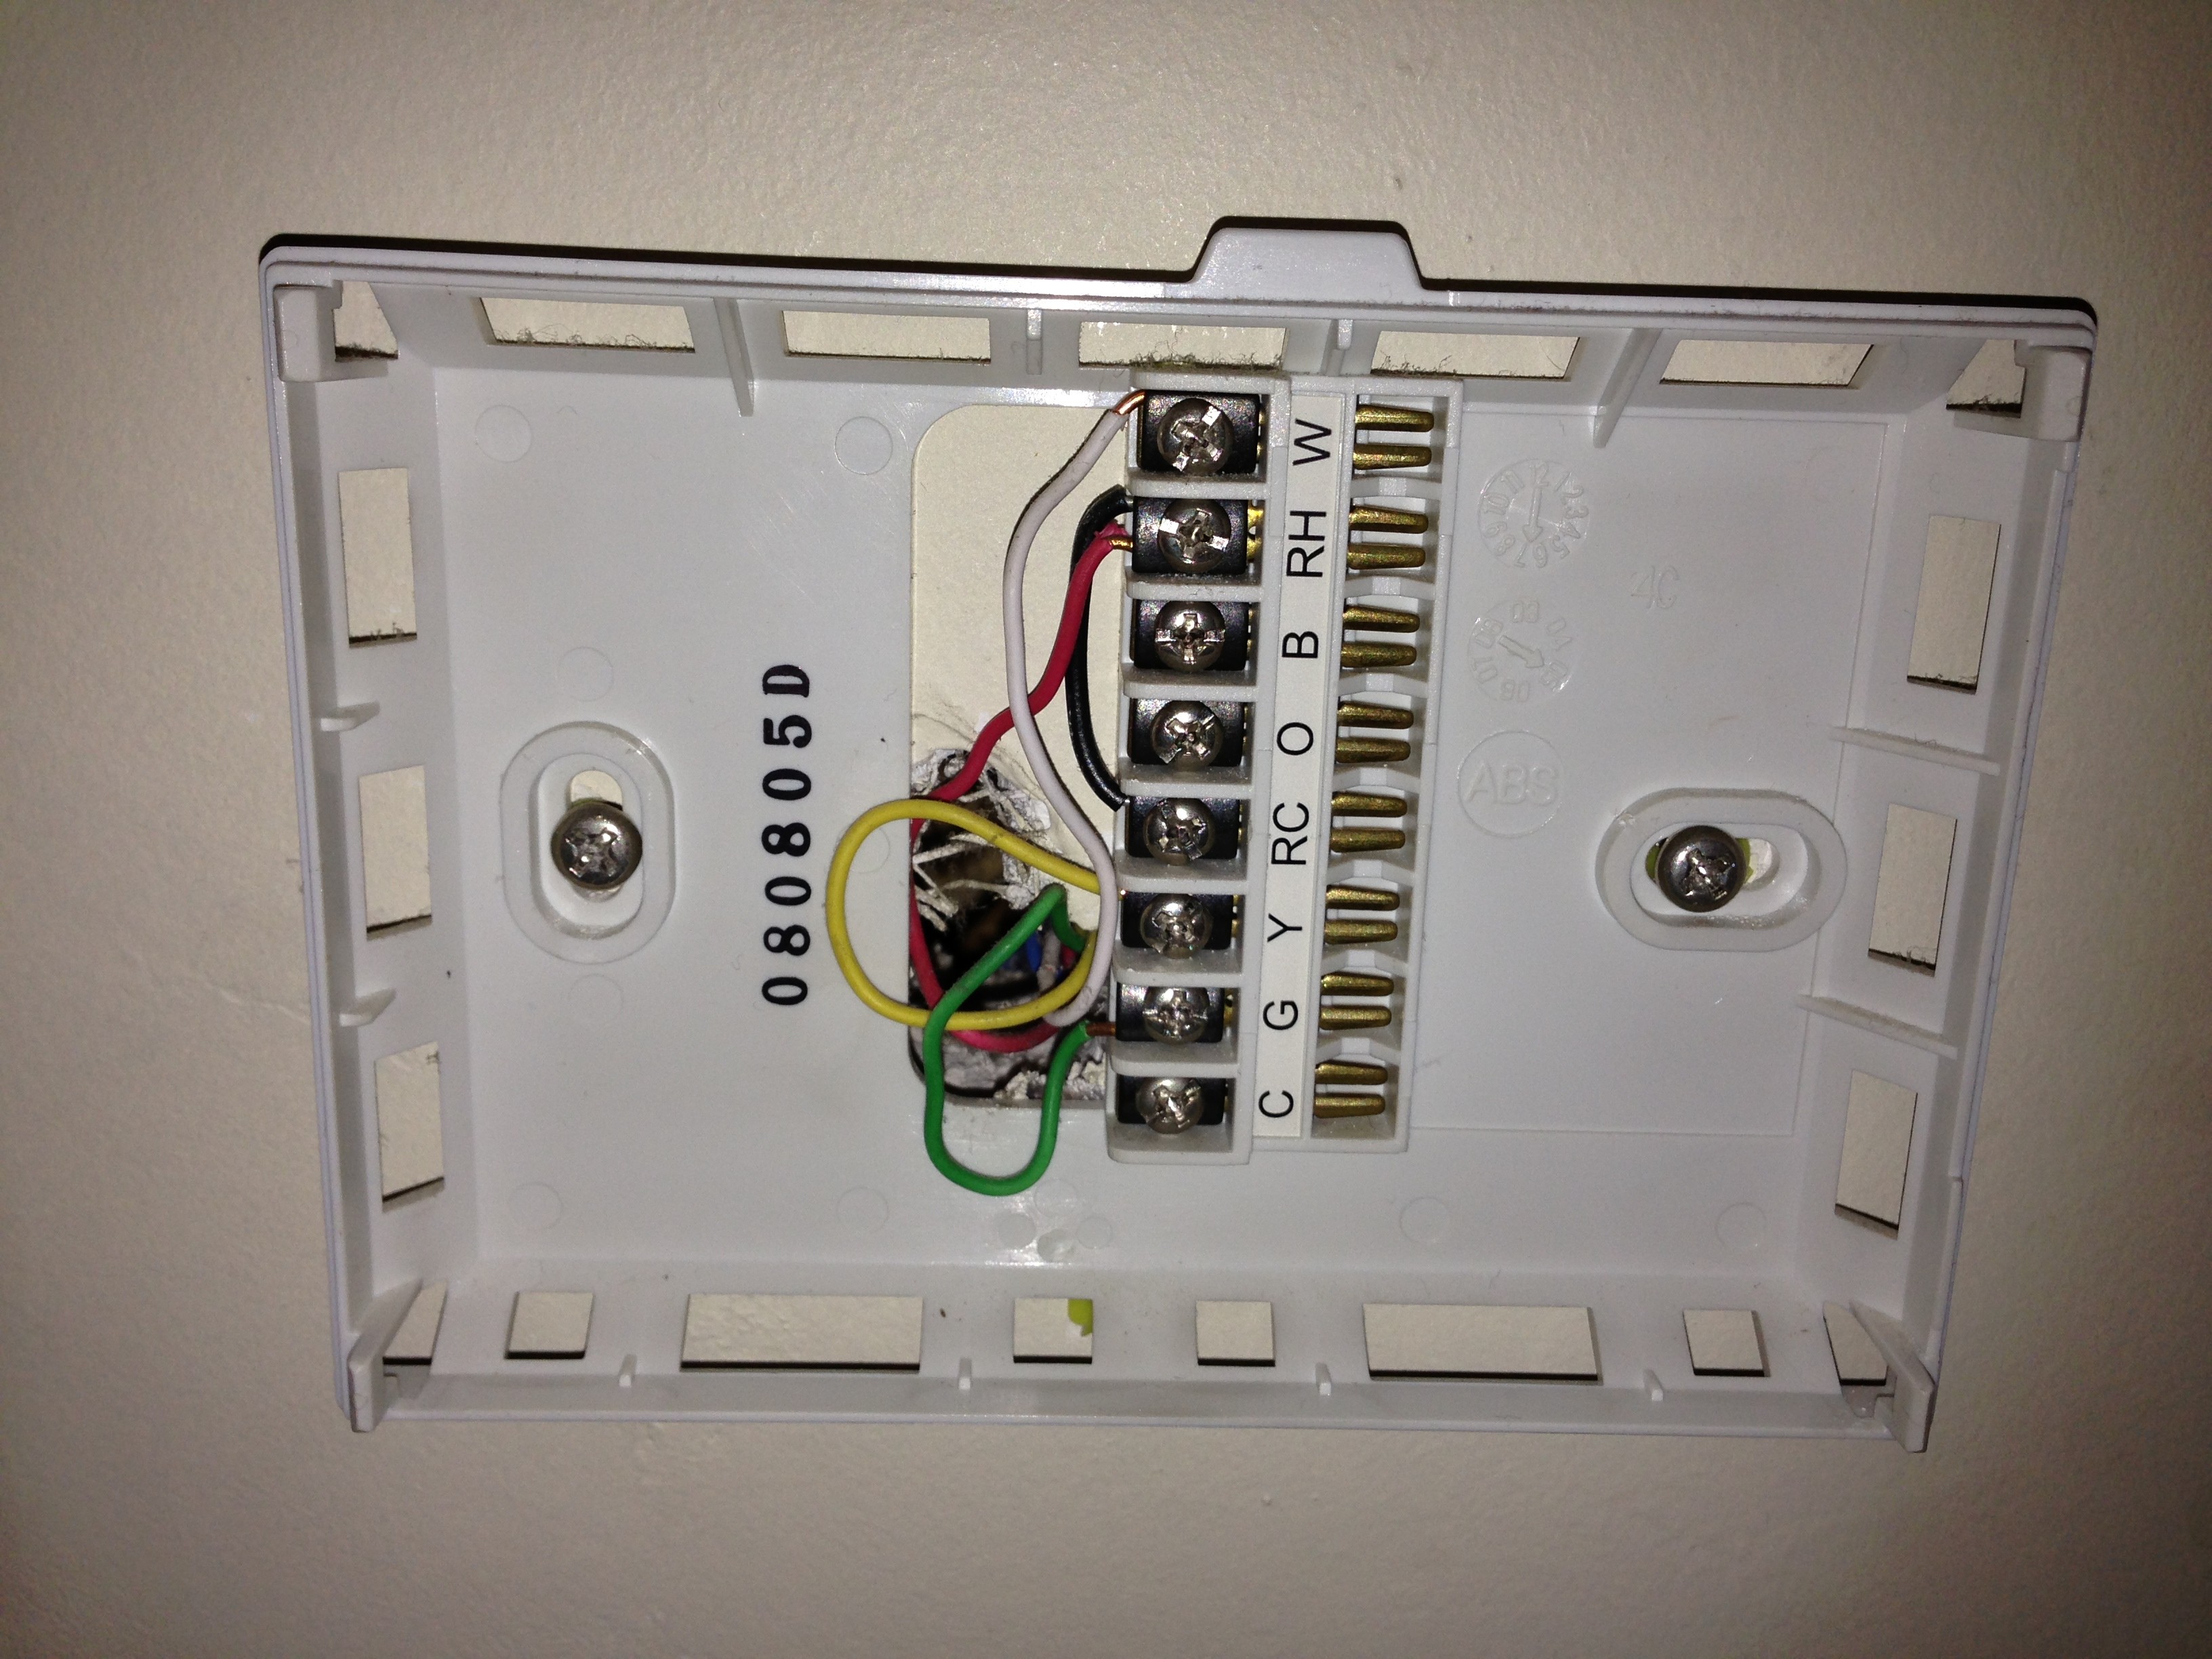 Standard Thermostat Wiring Diagram New Up A Brooke Crompton Luxpro Jpg 0b